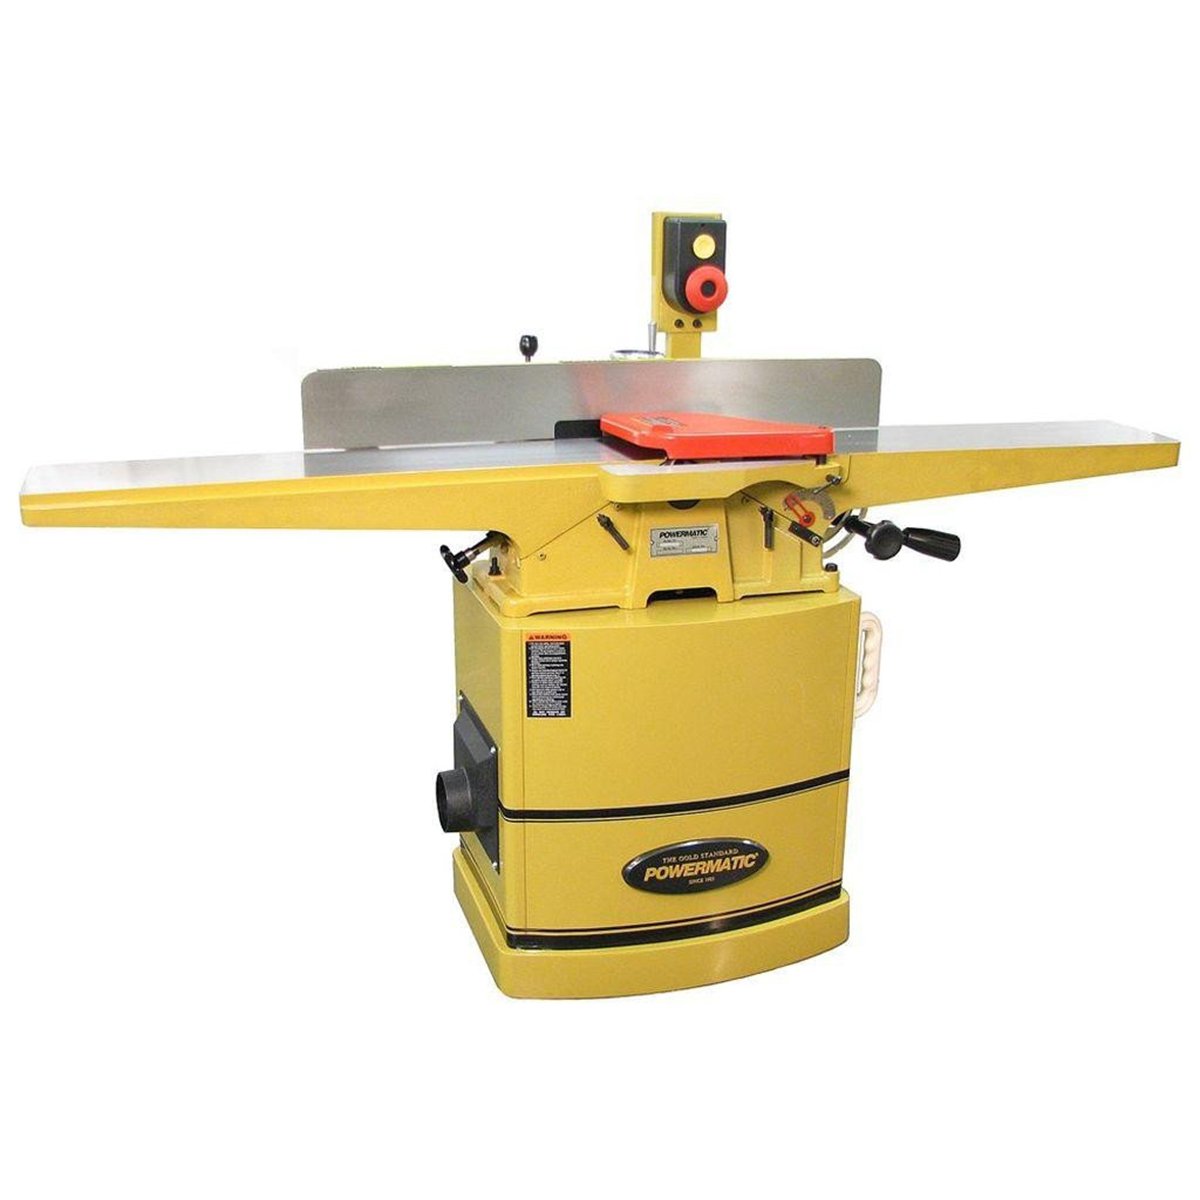 Powermatic 60 8" Jointer - 2 options to choose from - Ultimate Tools